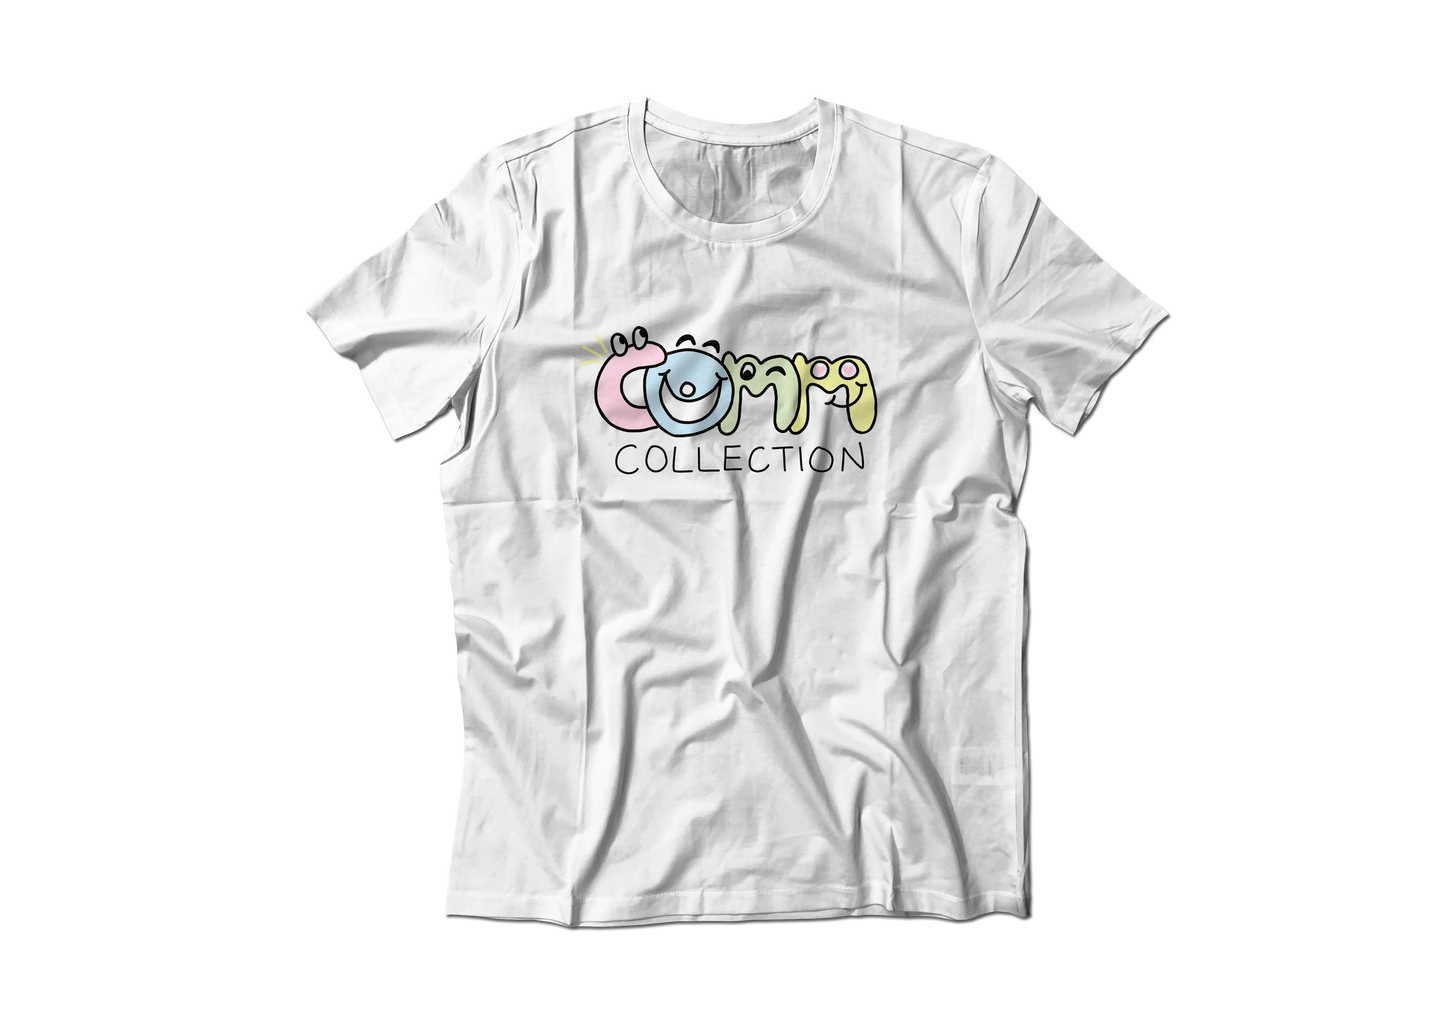 Comm Collection Tee